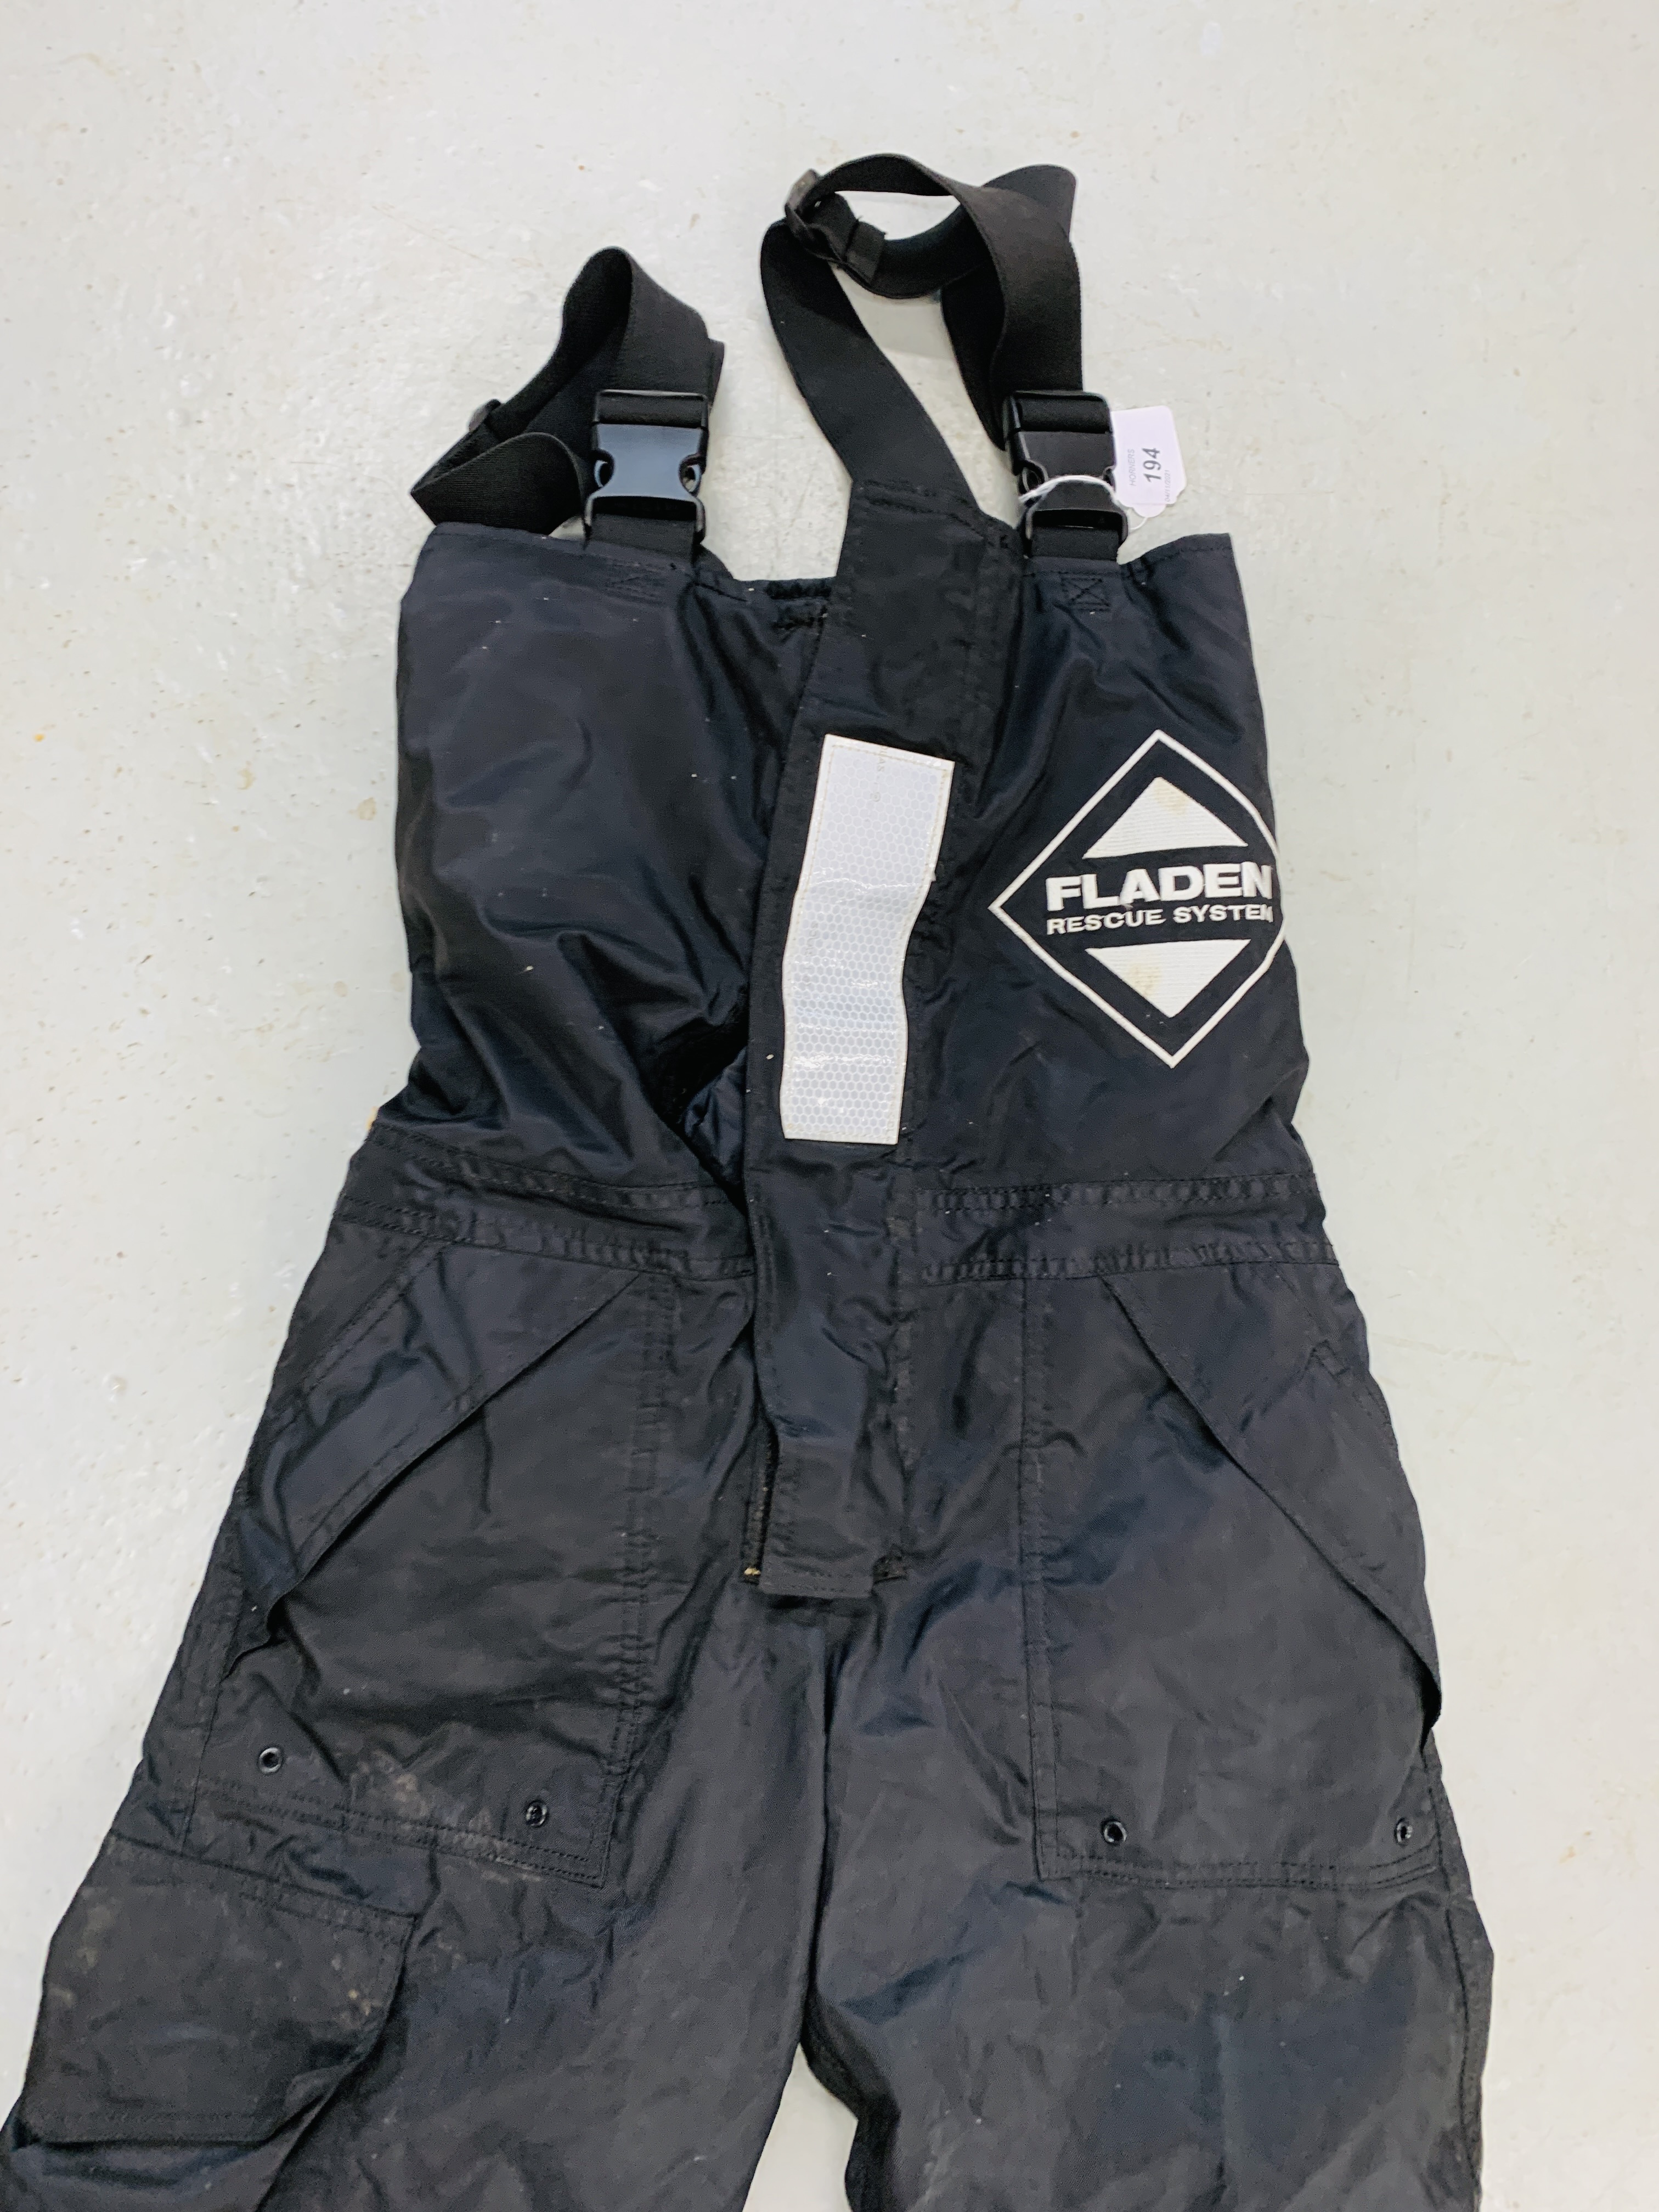 A PAIR OF FLADEN RESCUE SYSTEM BIB AND BRACE TROUSERS SIZE SMALL - Image 2 of 2